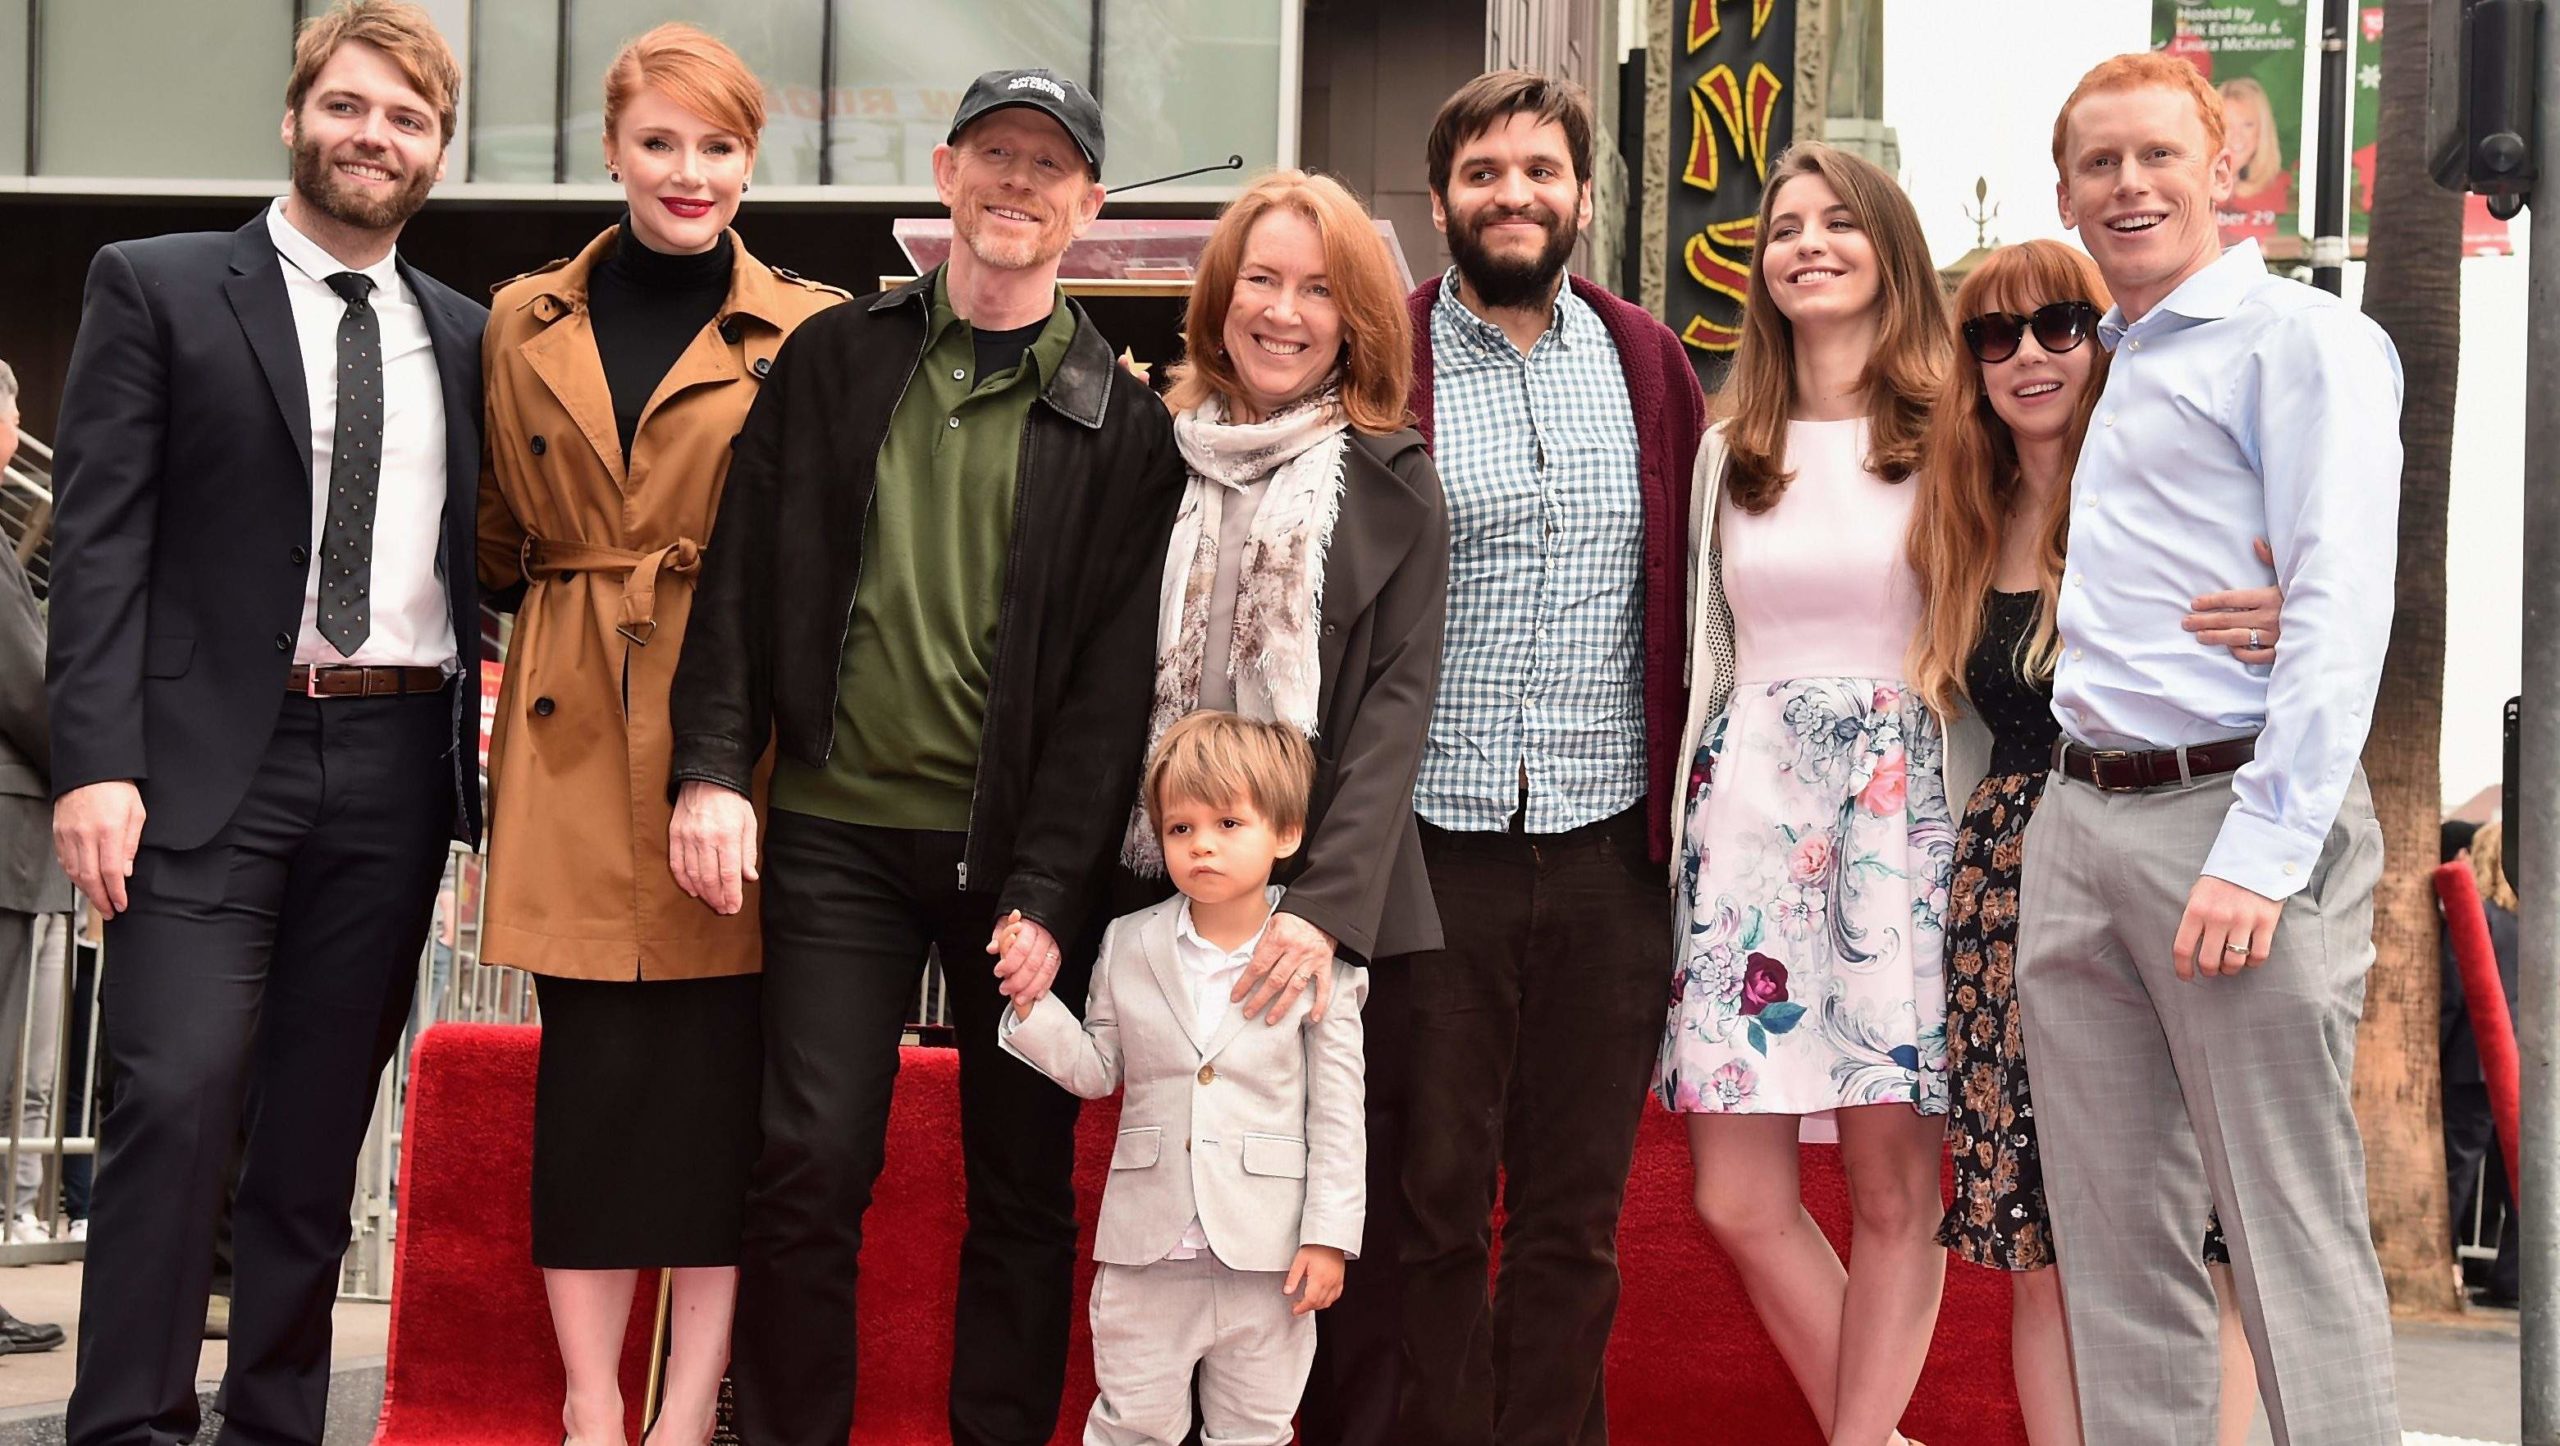 Ron Howard from ‘Happy Days’ Is a Proud Father of Four Children and Two of Whom Followed His Path.